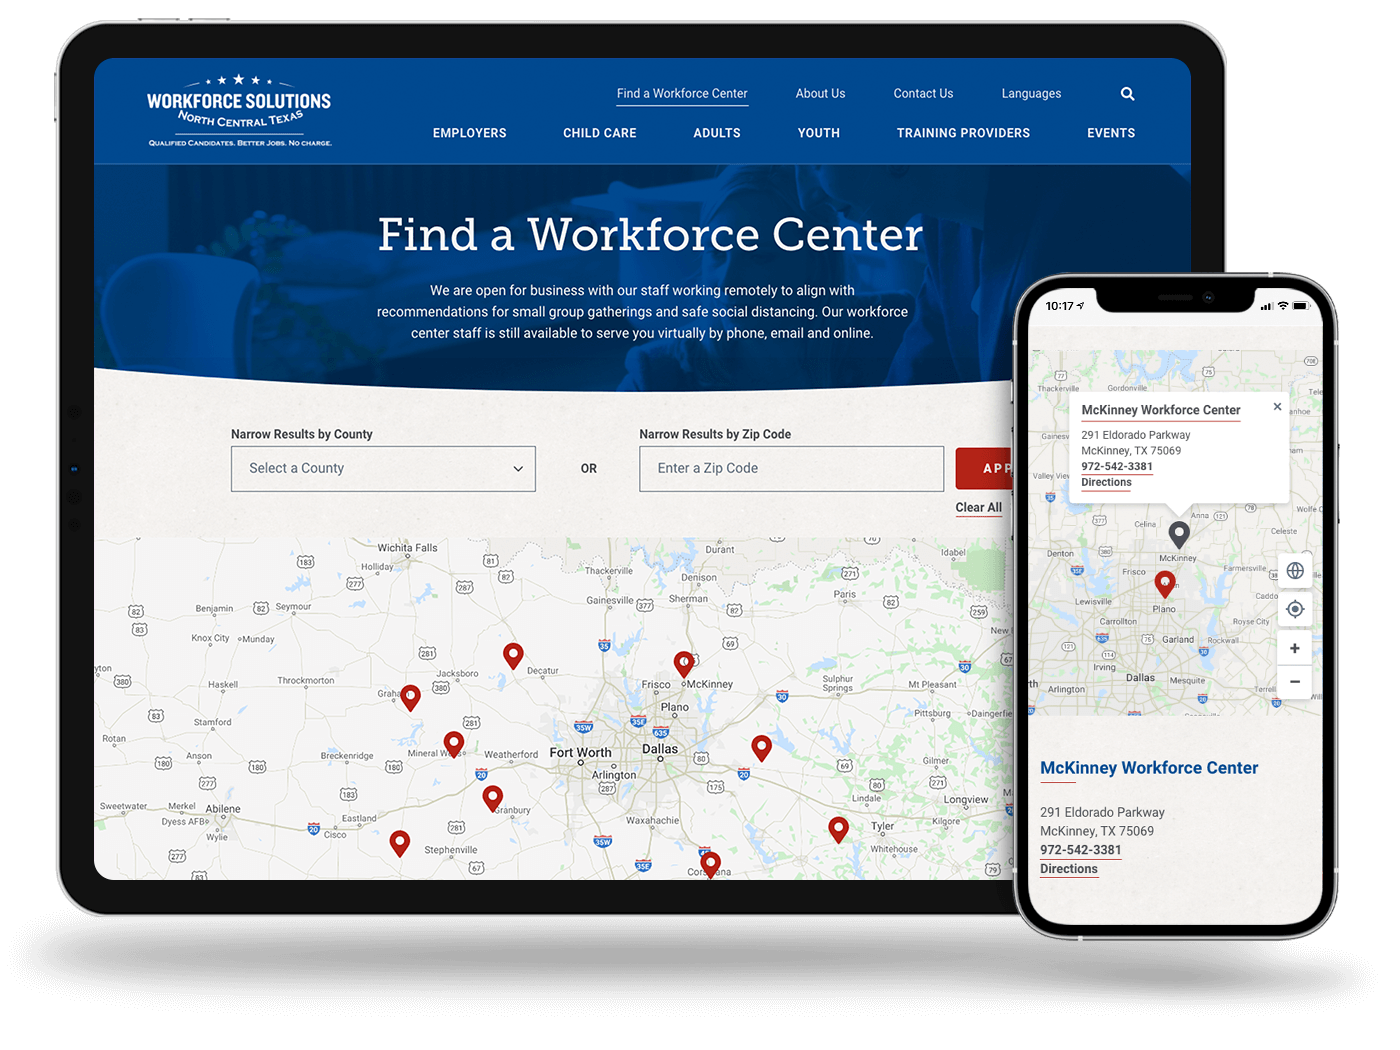 Ipad and iphone view of find a workforce center page